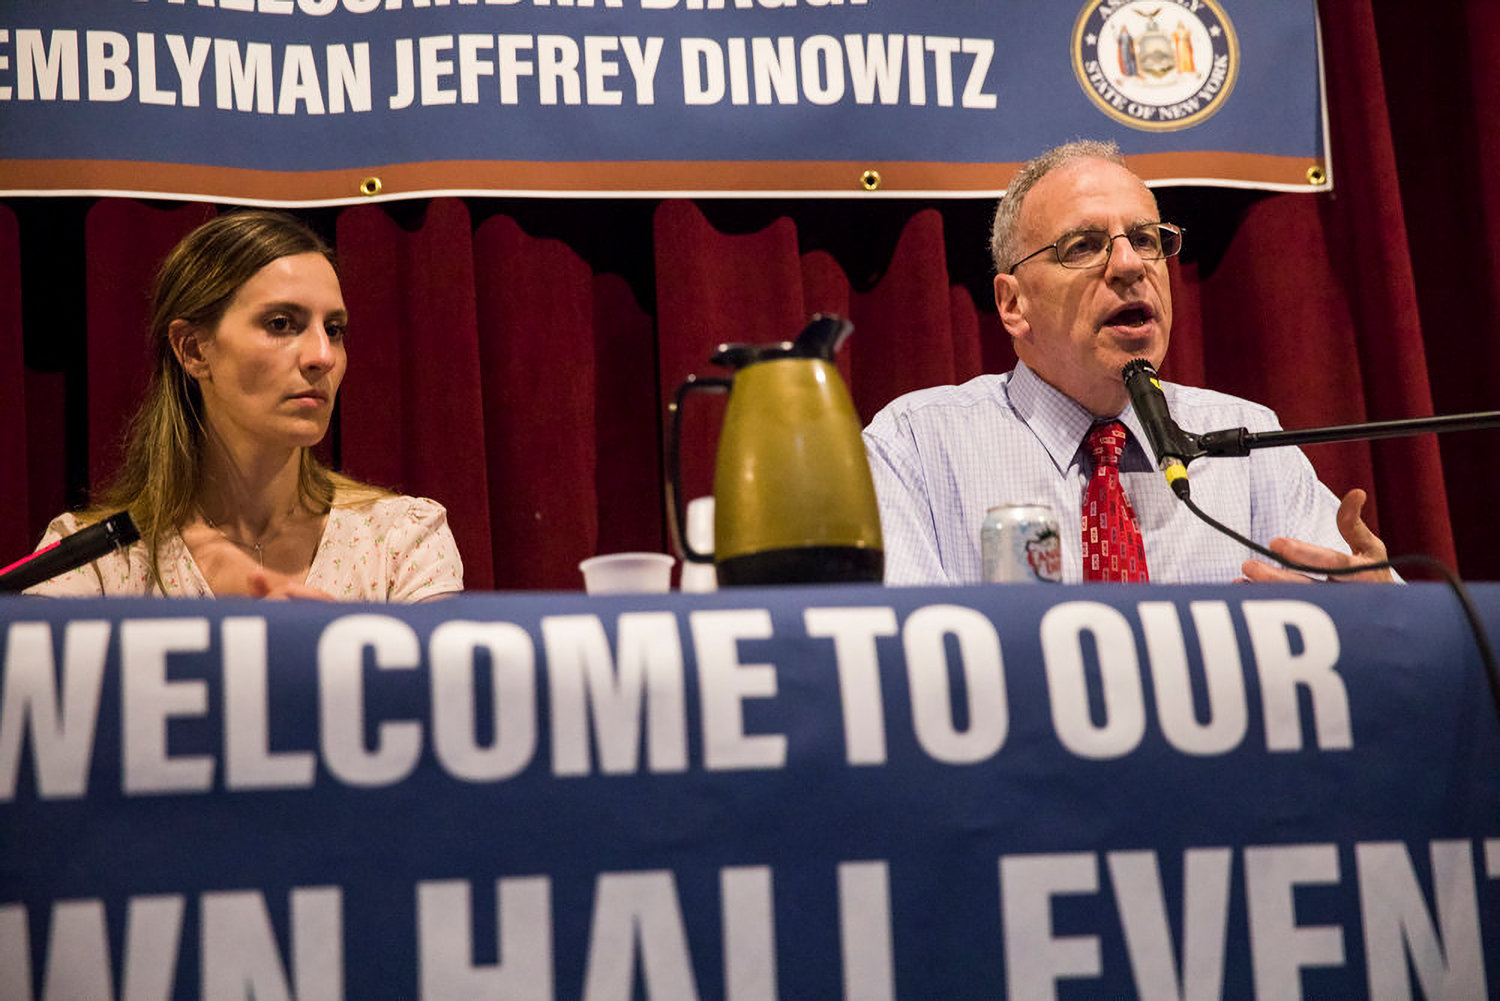 State Sen. Alessandra Biaggi said Assemblyman Jeffrey Dinowitz wouldn’t return her phone call as tried to figure out how to get a rape reform bill — legislation they both sponsored — to pass both chambers in the final days of the legislative session.